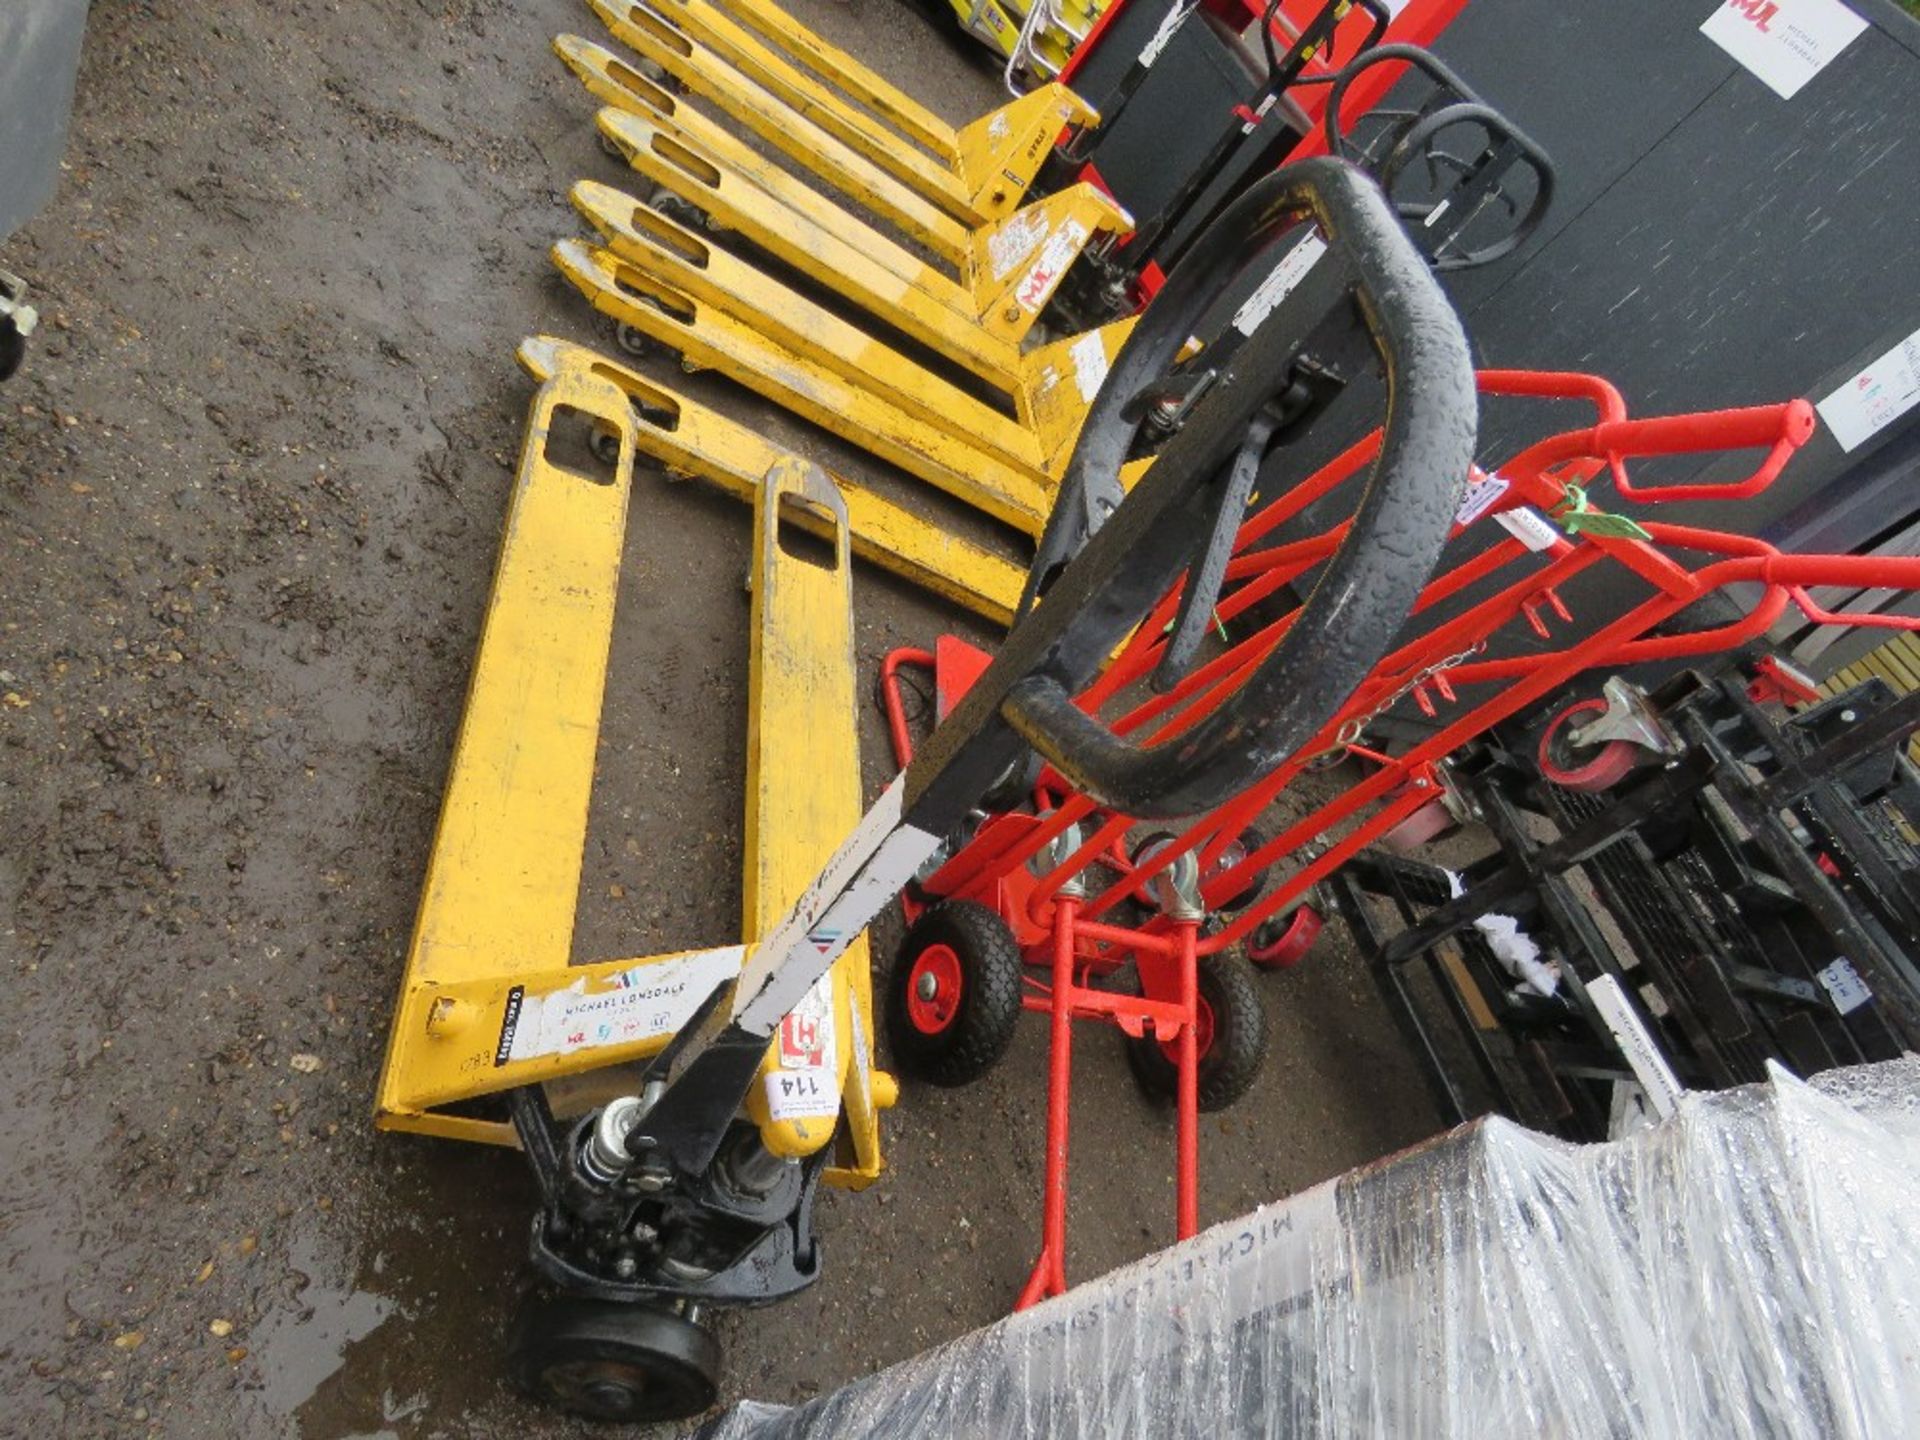 HYDRAULIC PALLET TRUCK. SOURCED FROM LARGE CONSTRUCTION COMPANY LIQUIDATION. - Image 2 of 3